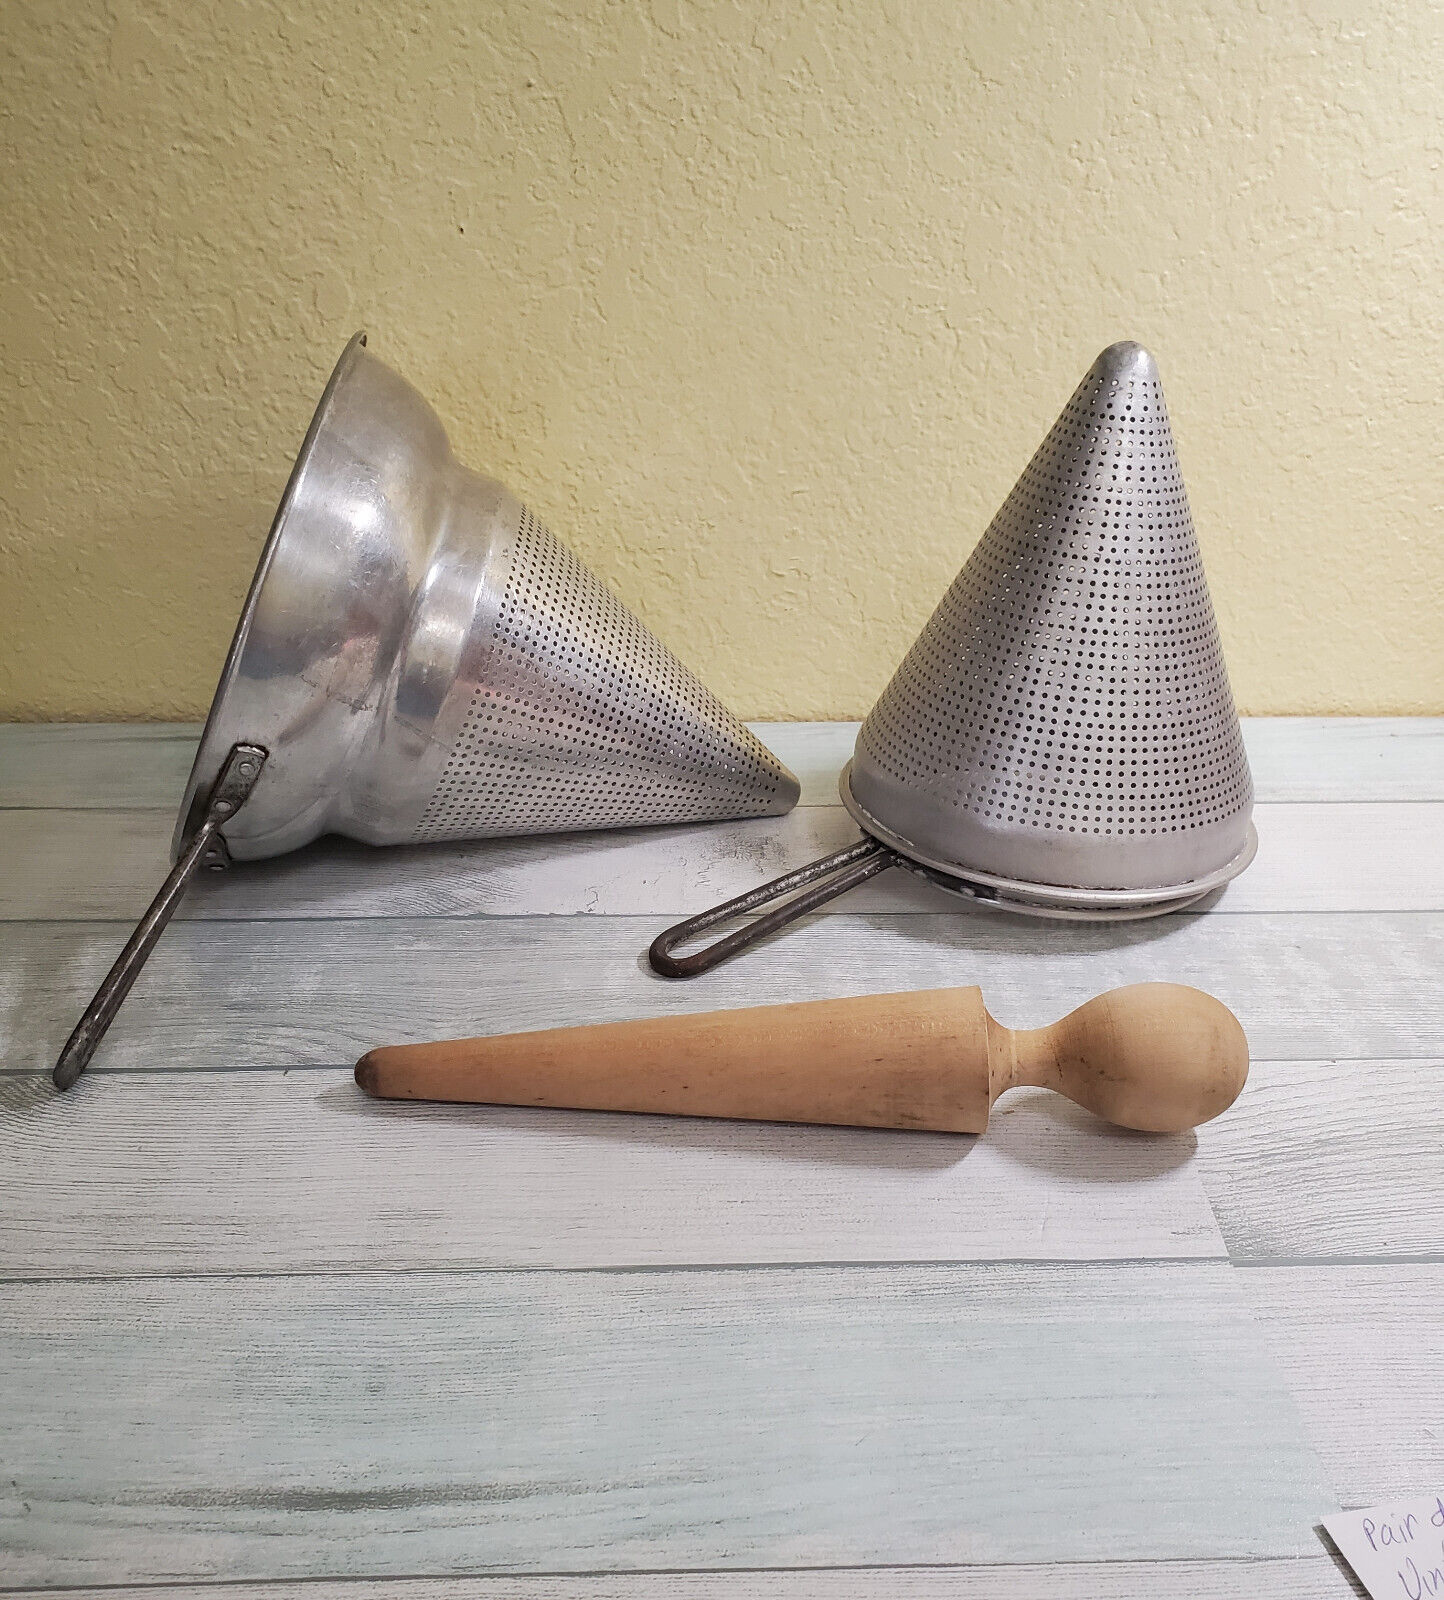 2 Vintage Wear-Ever Aluminum Sieves Strainers No. 8s (9.5” & 8”) 1 Wooden Cone